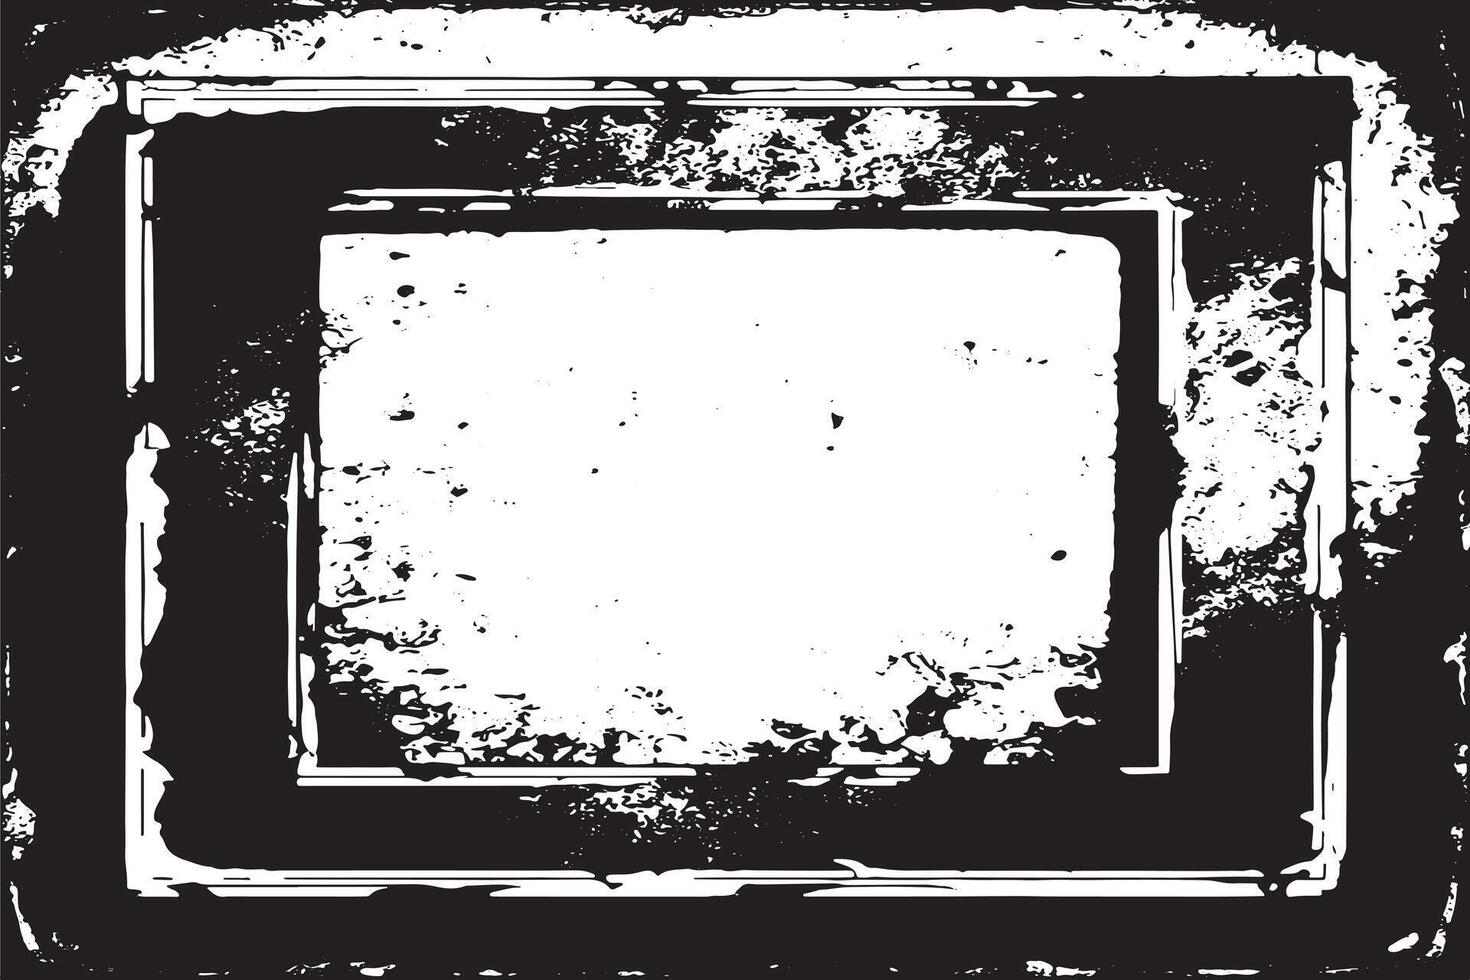 black and white grunge destressed overlay image of photo frame or simple frame for background or texture. vector